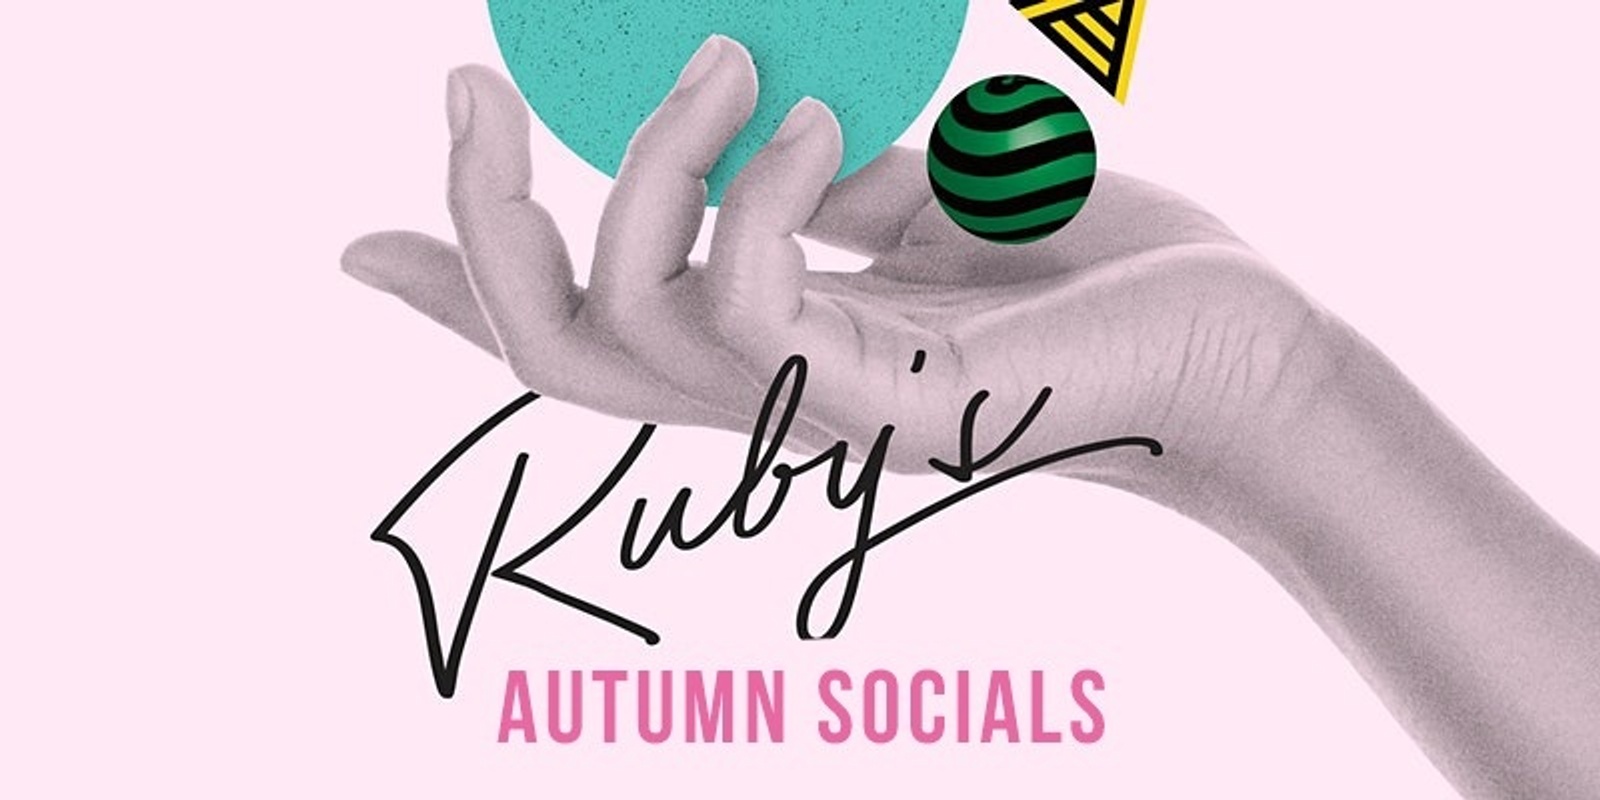 Banner image for Ruby's Autumn Socials: The JukeJoint Three